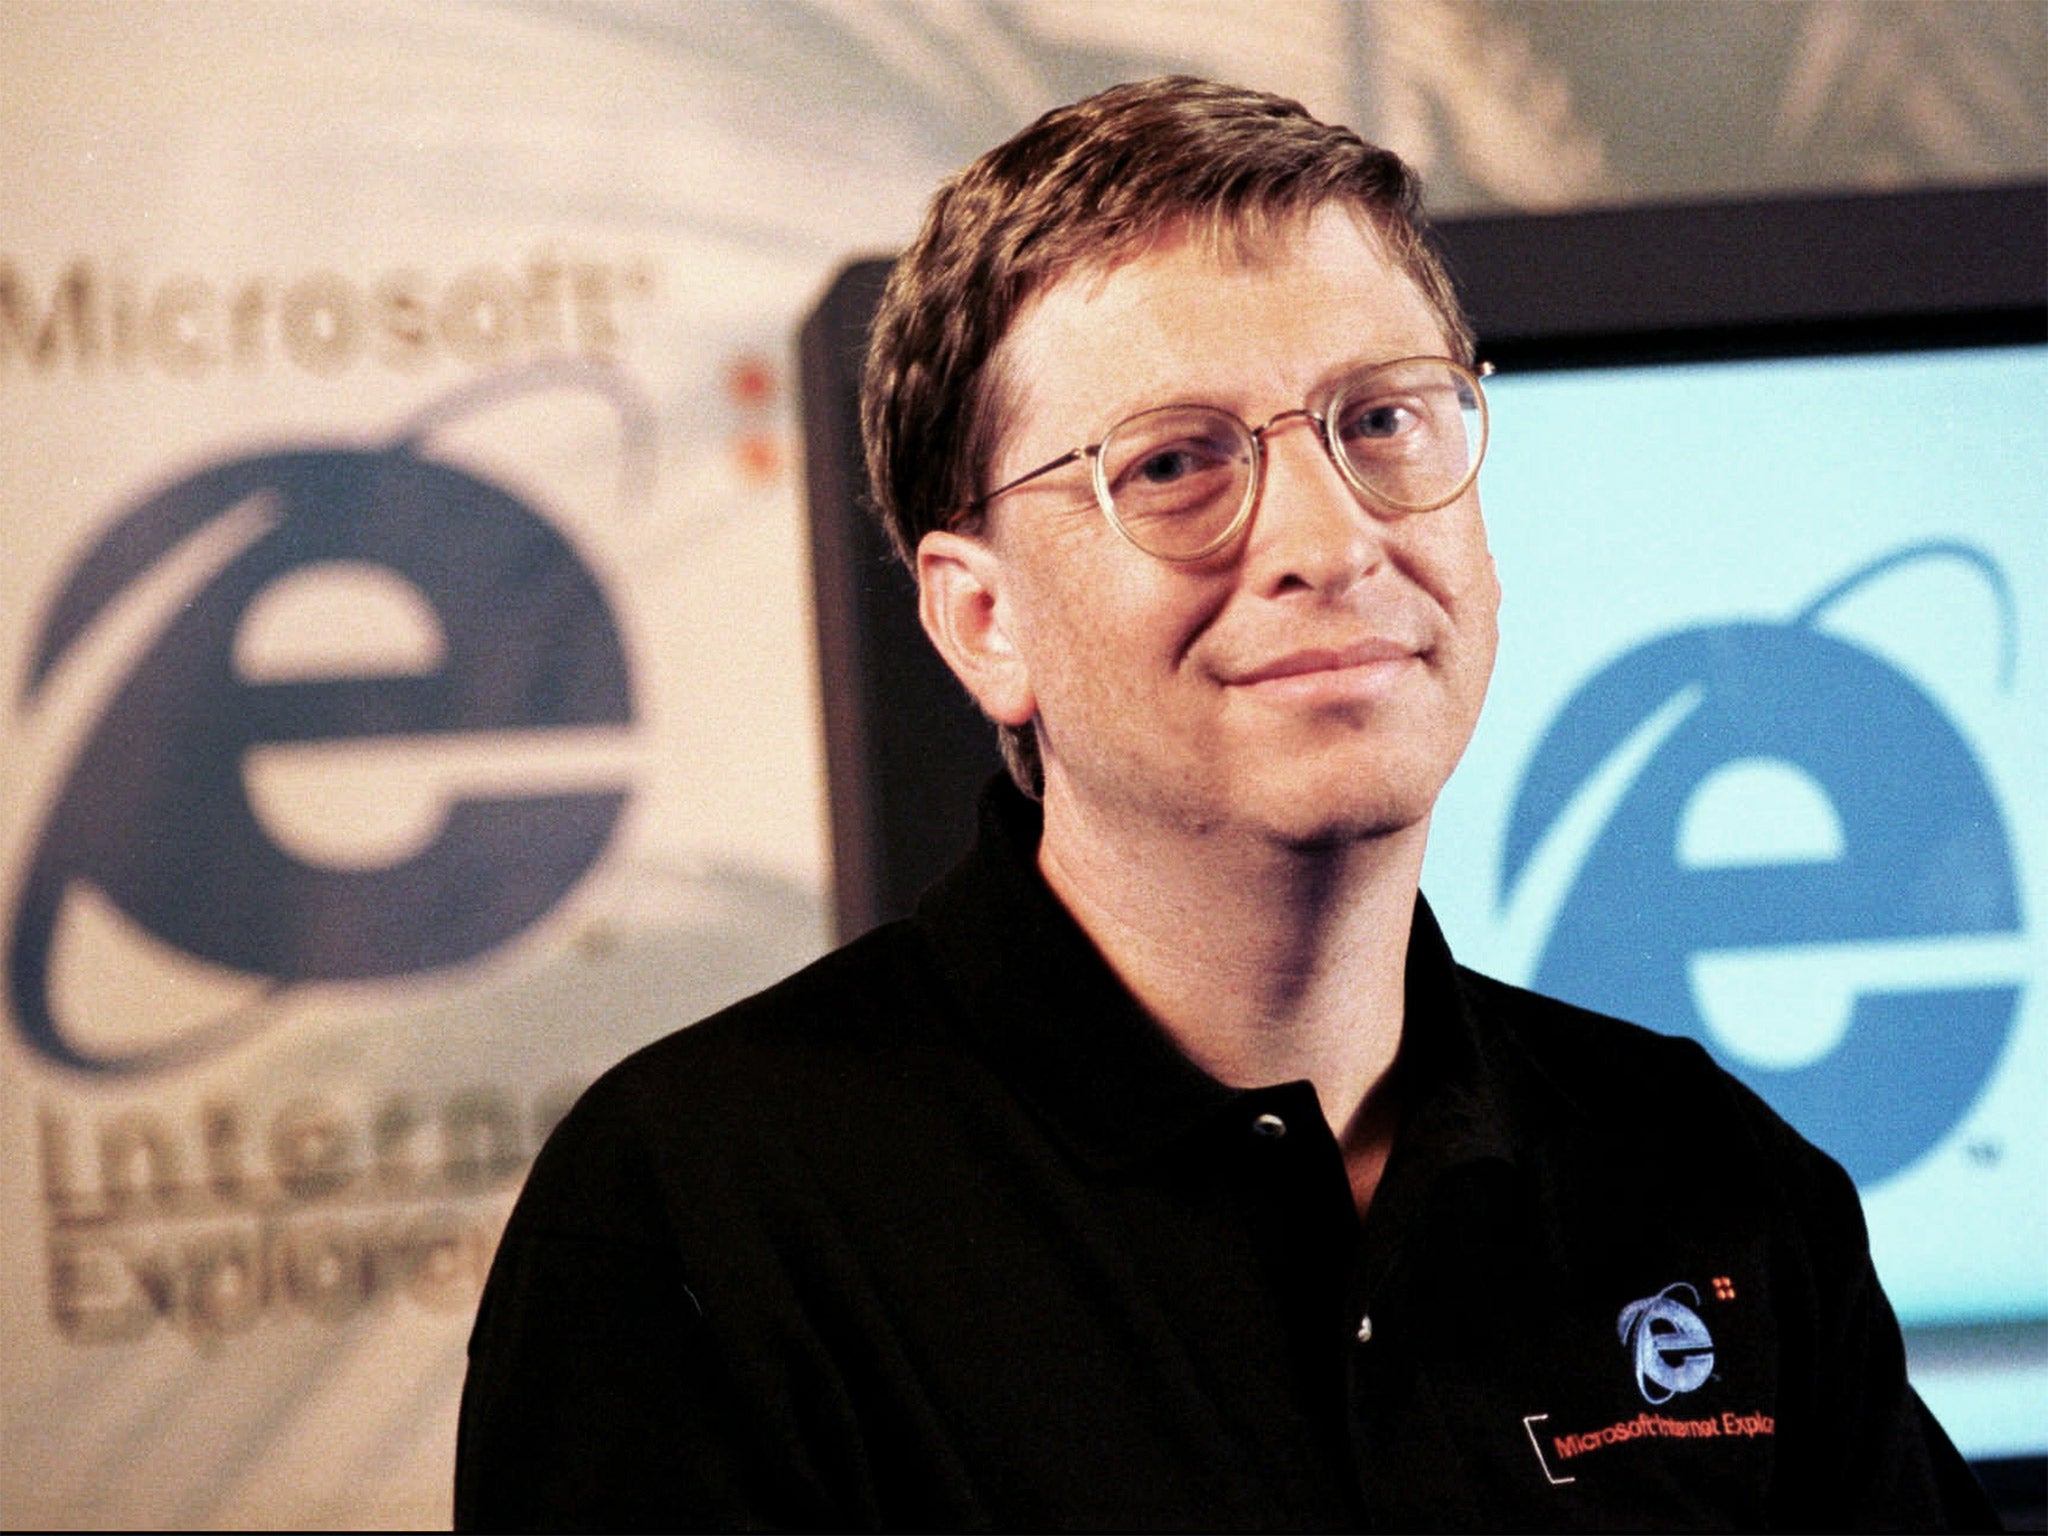 Bill Gates at the launch of an early Internet Explorer update